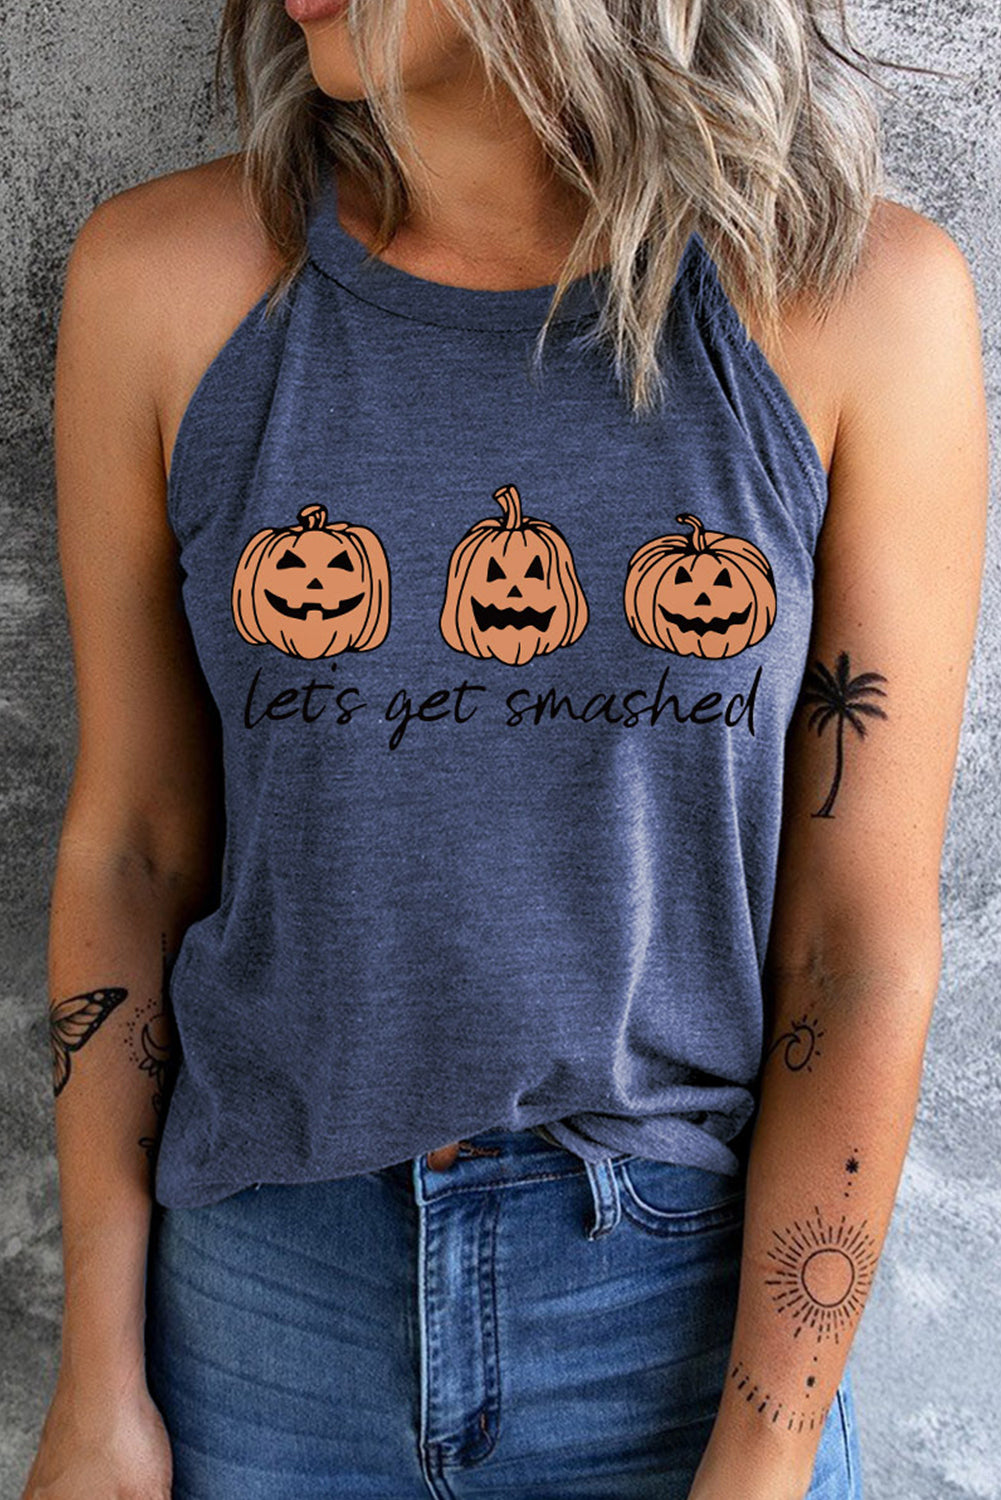 LET’S GET SMASHED Graphic Tank Top - Blue / XS - Women’s Clothing & Accessories - Shirts & Tops - 1 - 2024